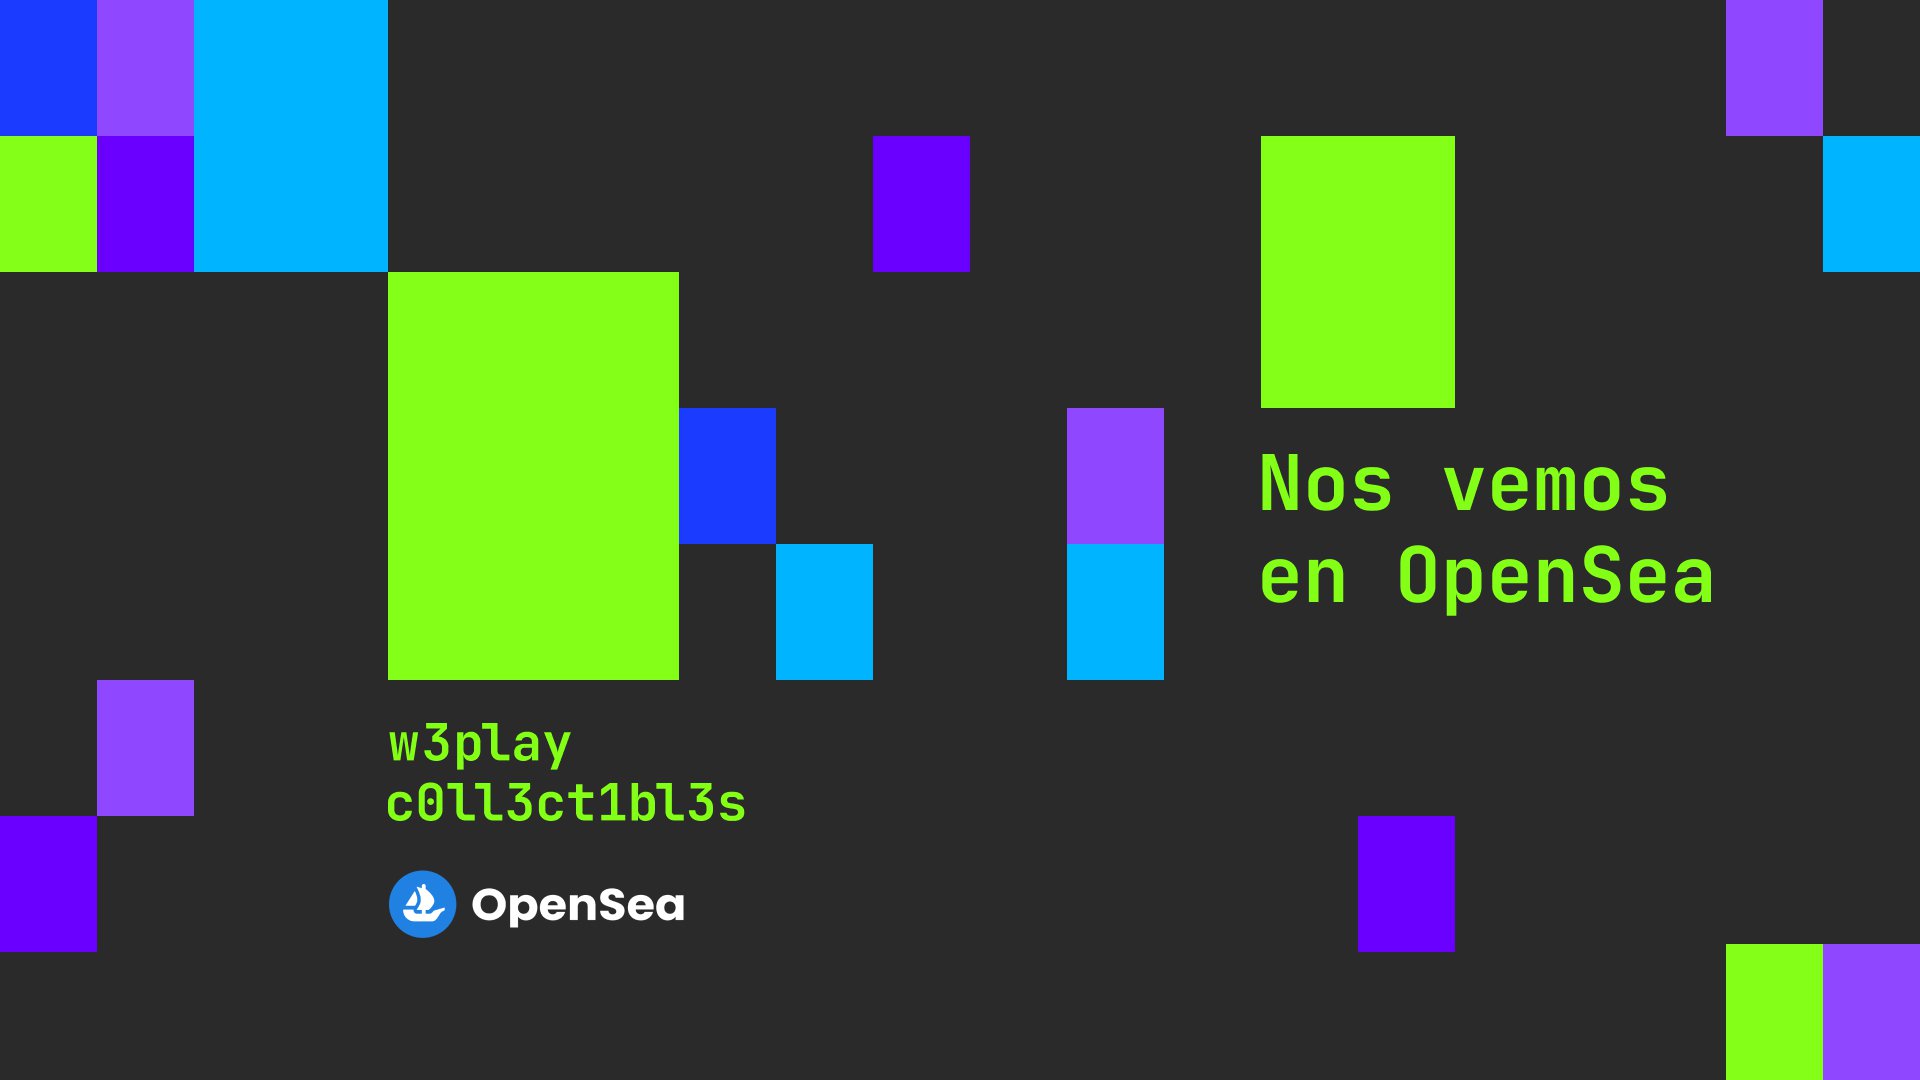 WePlay Collectibles: nos vemos en OpenSea. Imagen: WePlay Holding